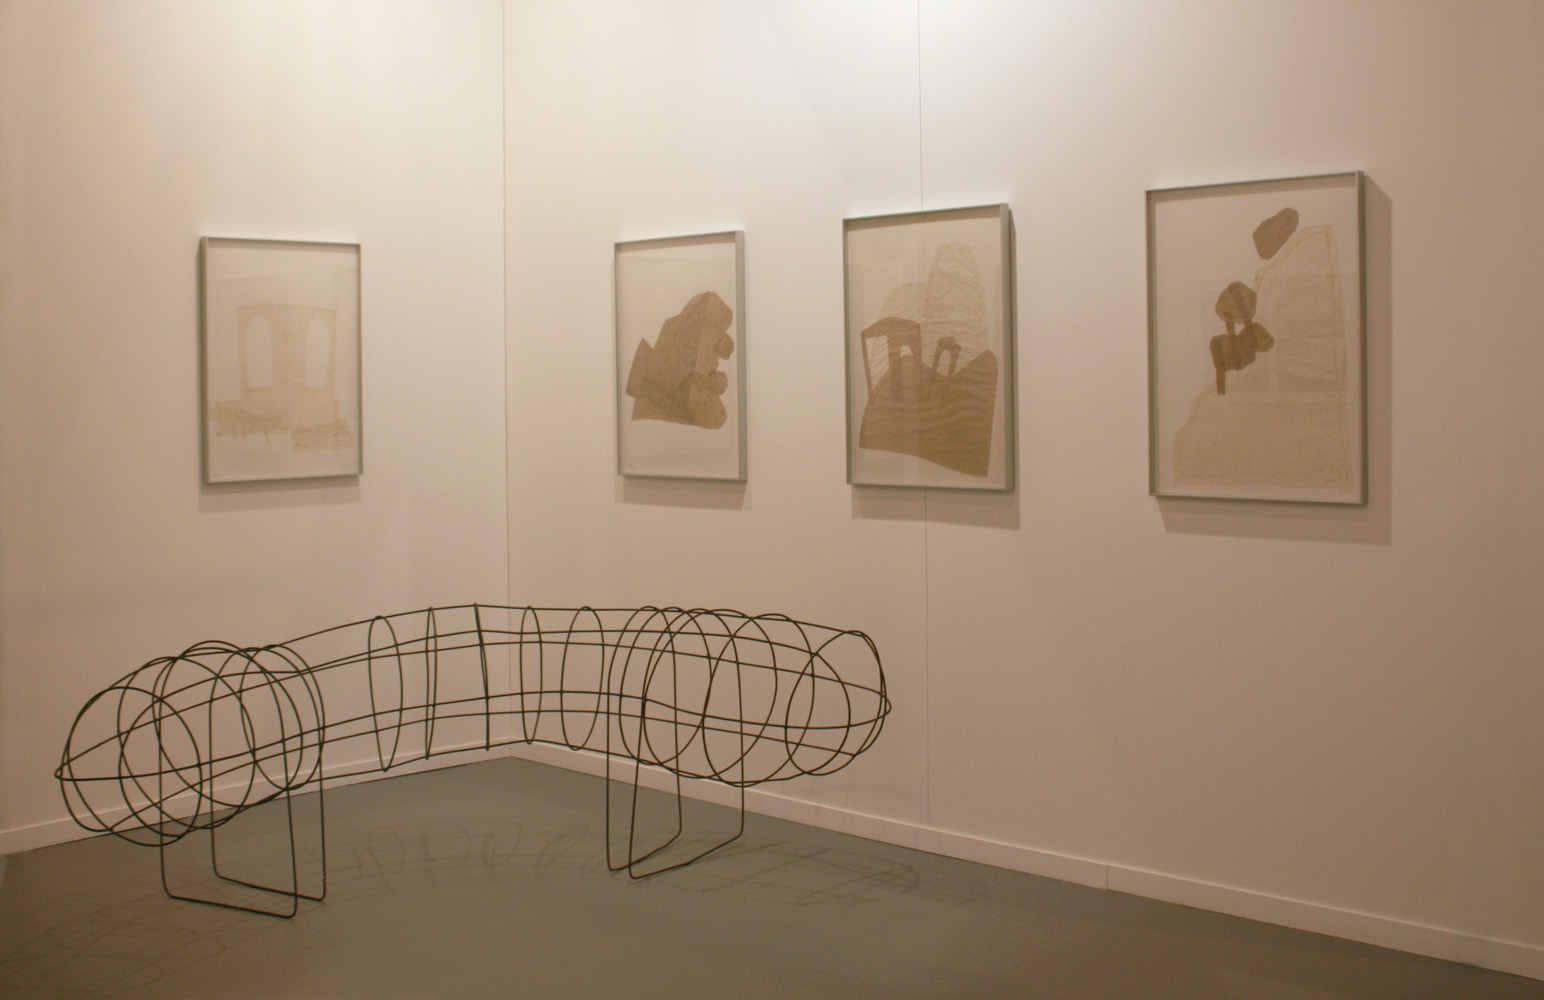 Installation view of the Galeria Maior stand in ARCOmadrid, 2014